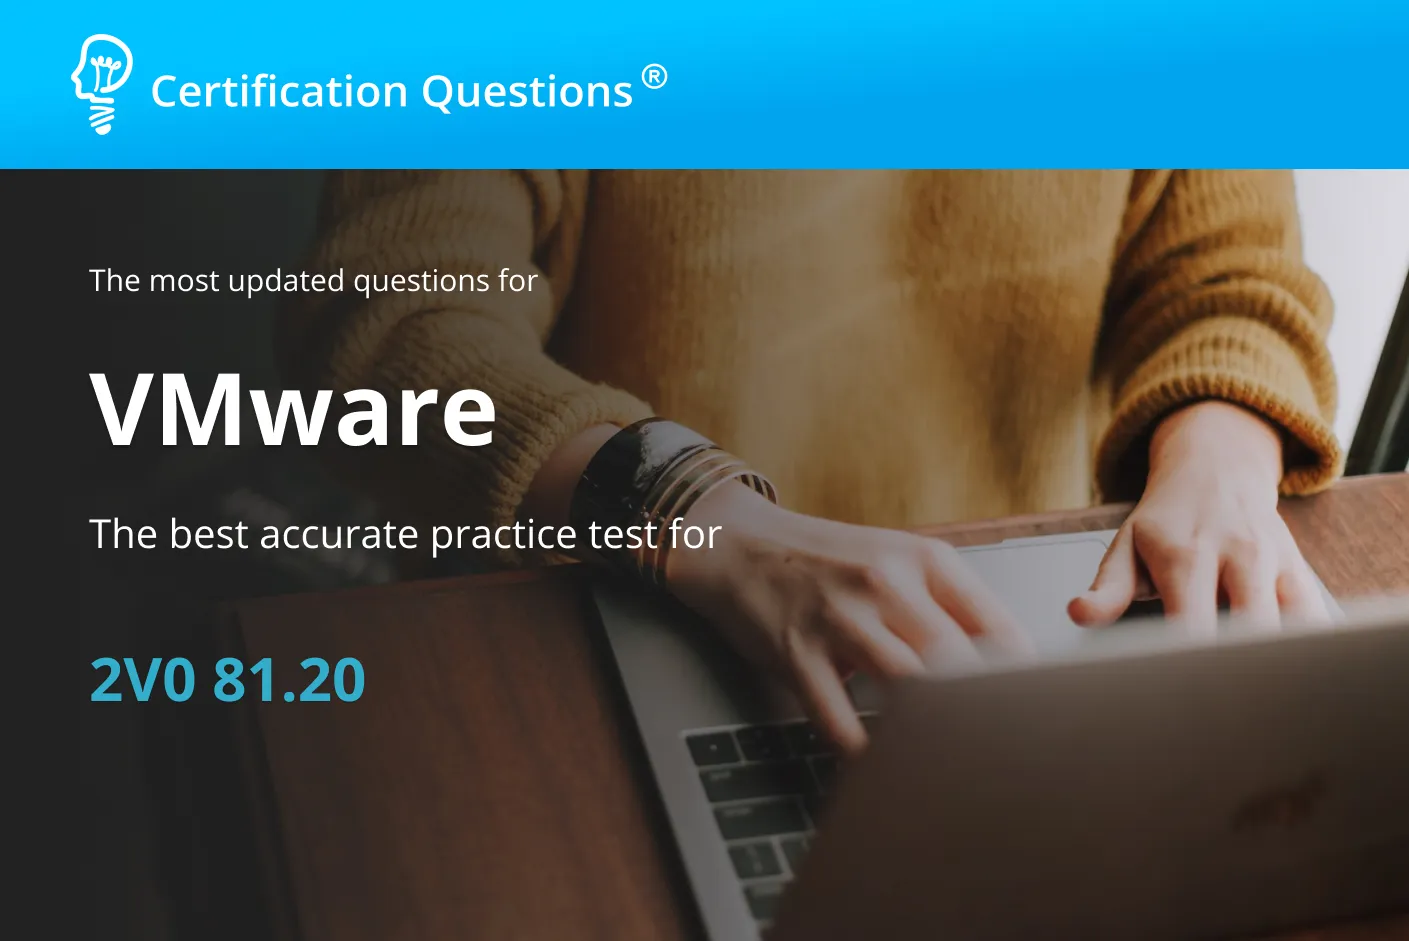 This image is related to VMware Security 2v0-81.20 practice test